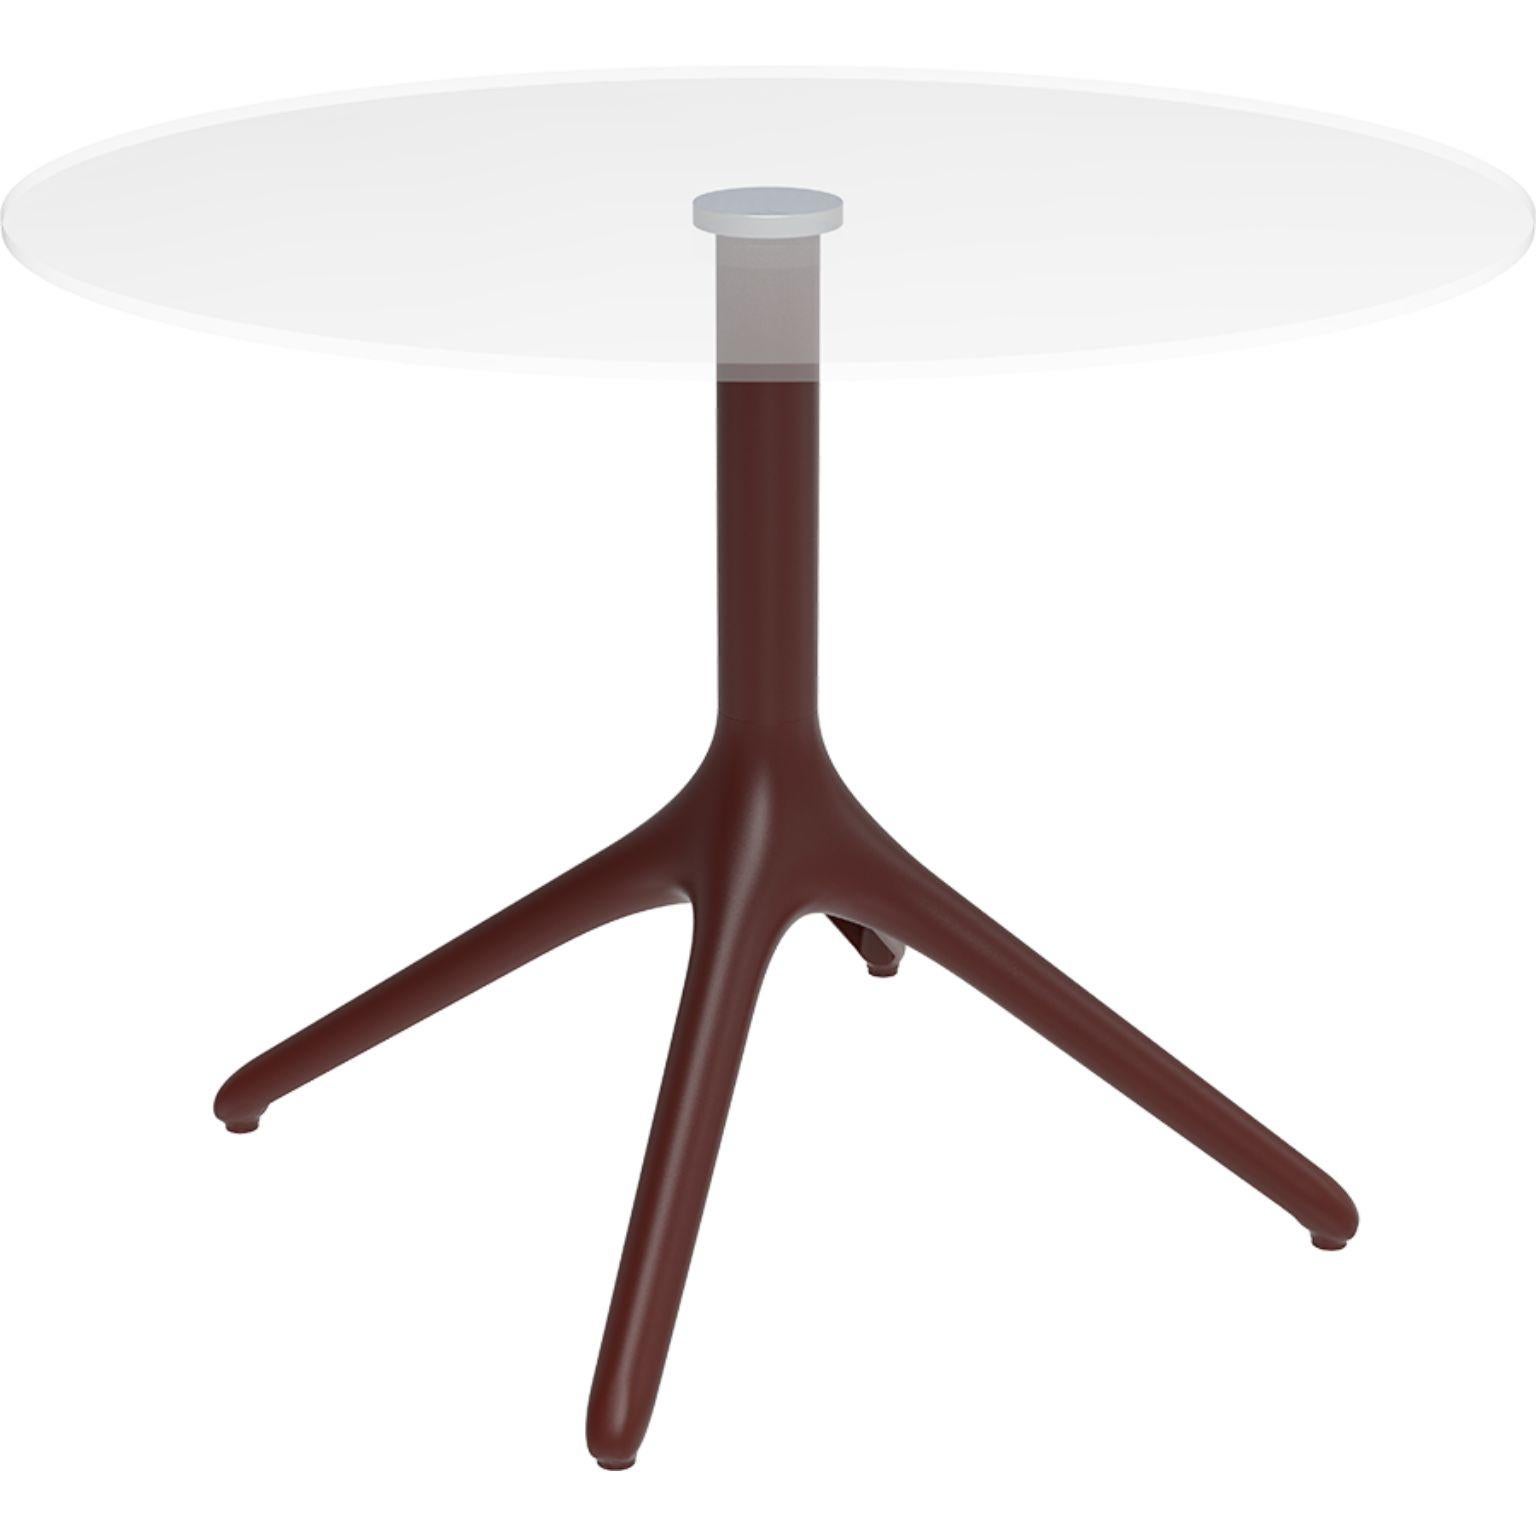 Aluminum Uni Cream Table Xl 73 by Mowee For Sale